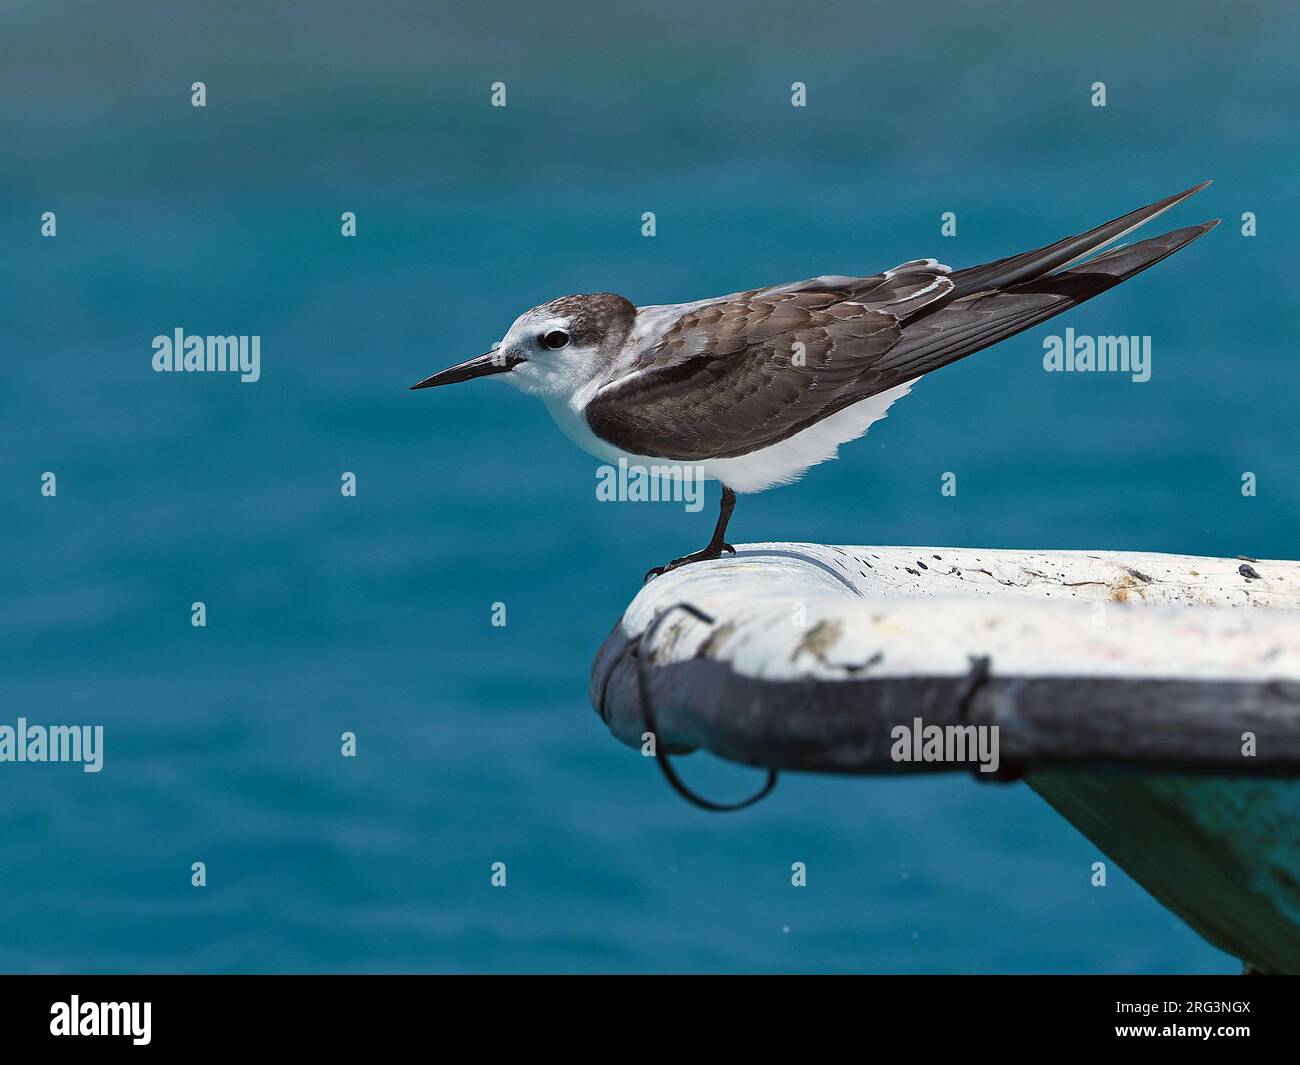 Immature Spectacled Tern (Onychoprion lunatus), also known as the grey-backed tern, standing on a boat in tropical seas in French Polynesia. Stock Photo